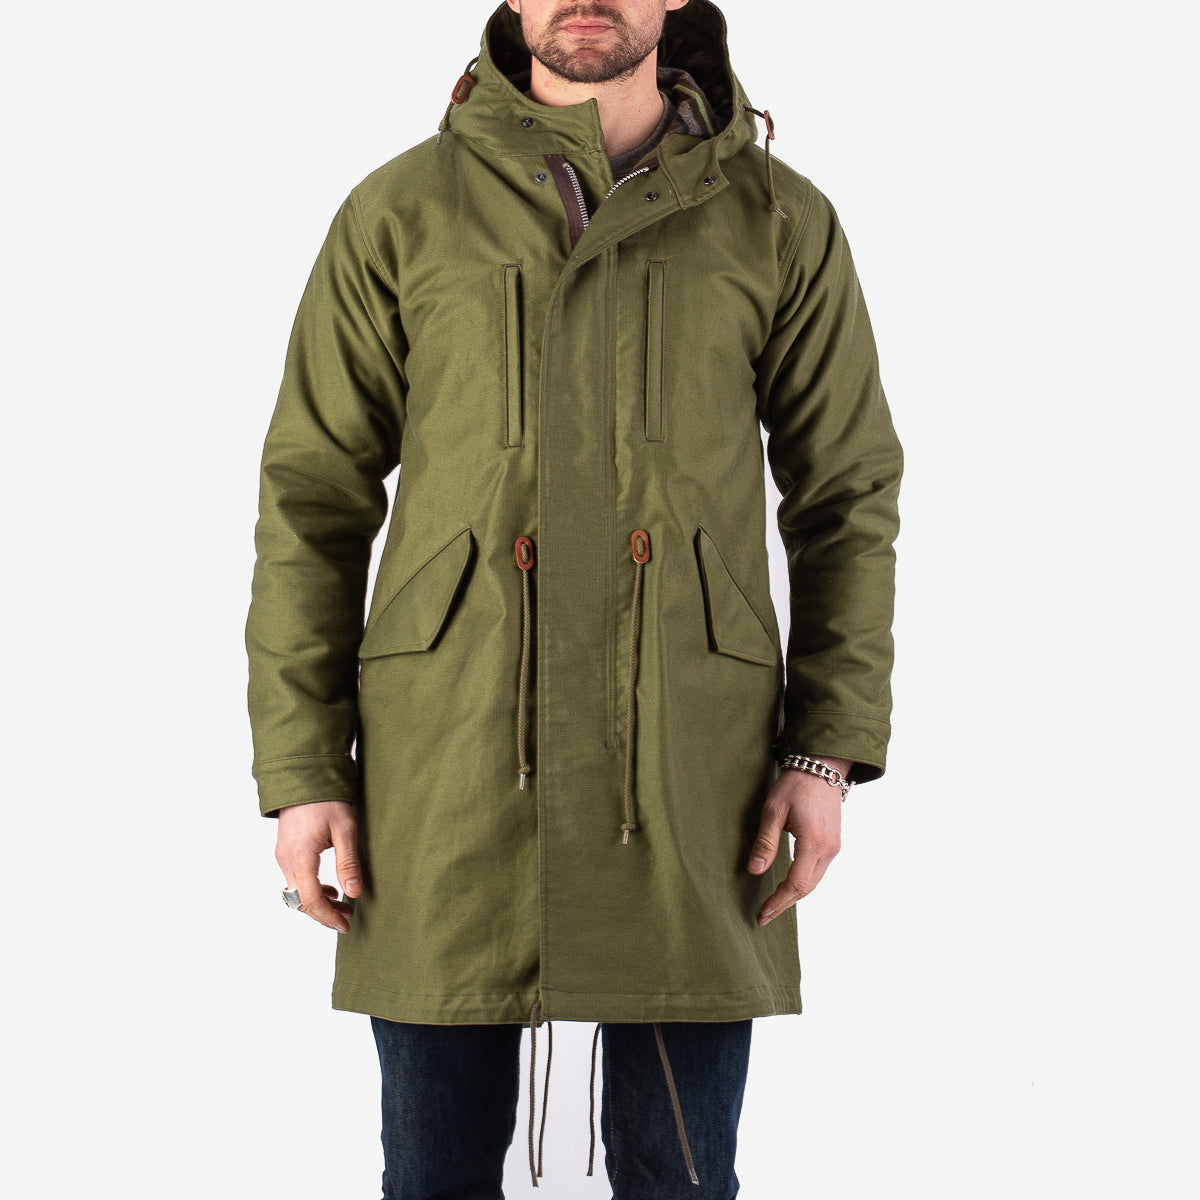 Iron Heart Coat – Whipcord M-51 IHM-34 Olive Drab Field